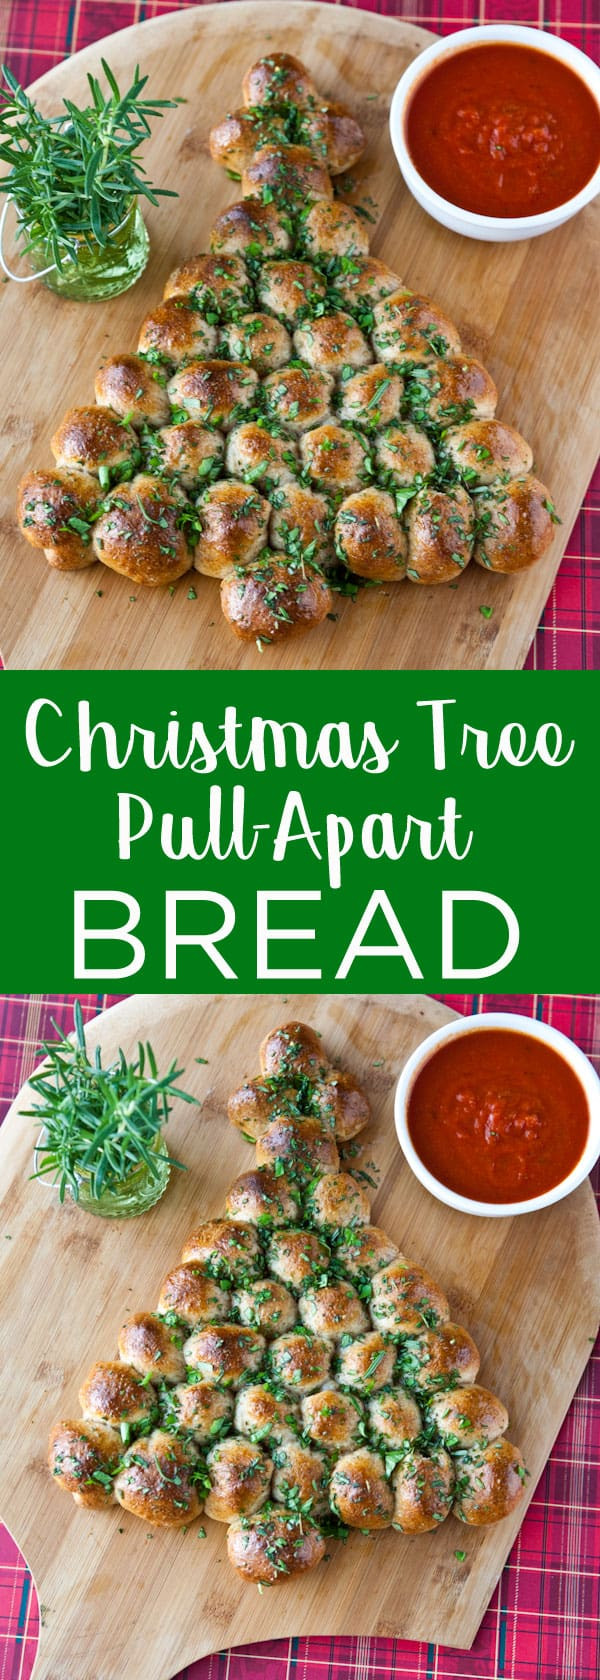 Pull Apart Christmas Tree Bread
 Eclectic Recipes Christmas Tree Pull Apart